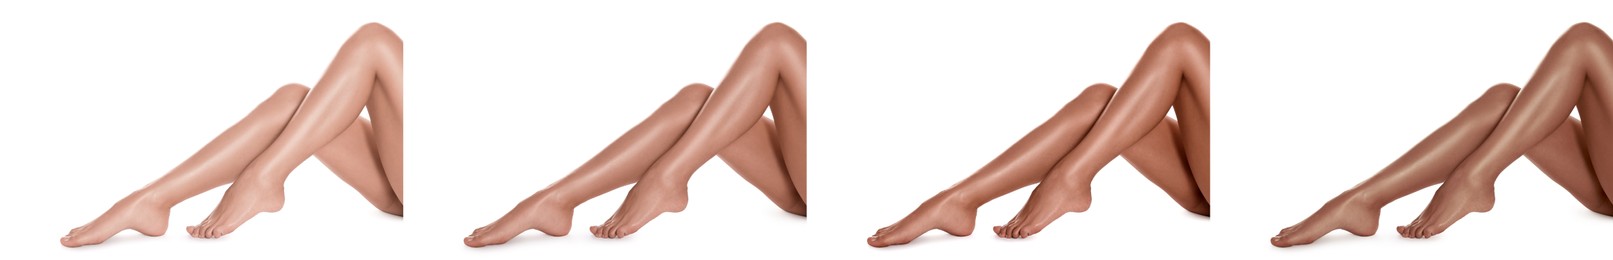 Woman with beautiful legs on white background, closeup. Collage of photos showing stages of suntanning